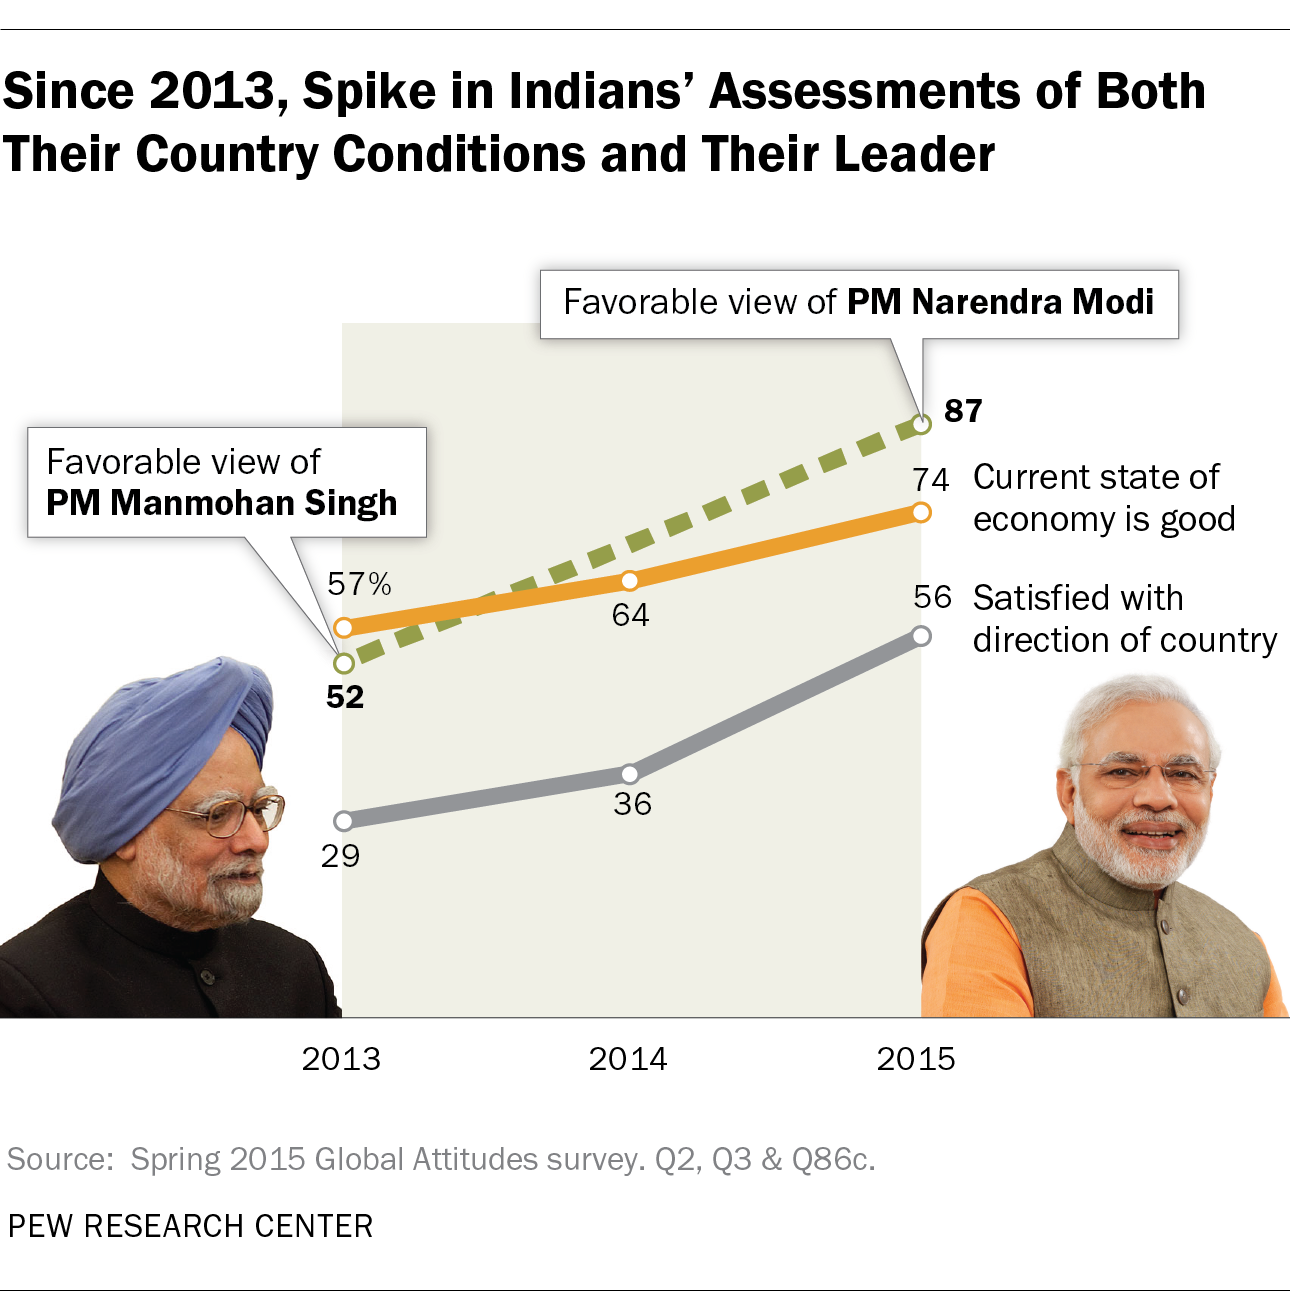 Since 2013, Spike in Indians' Assessments of Both Their Country Conditions and Their Leader